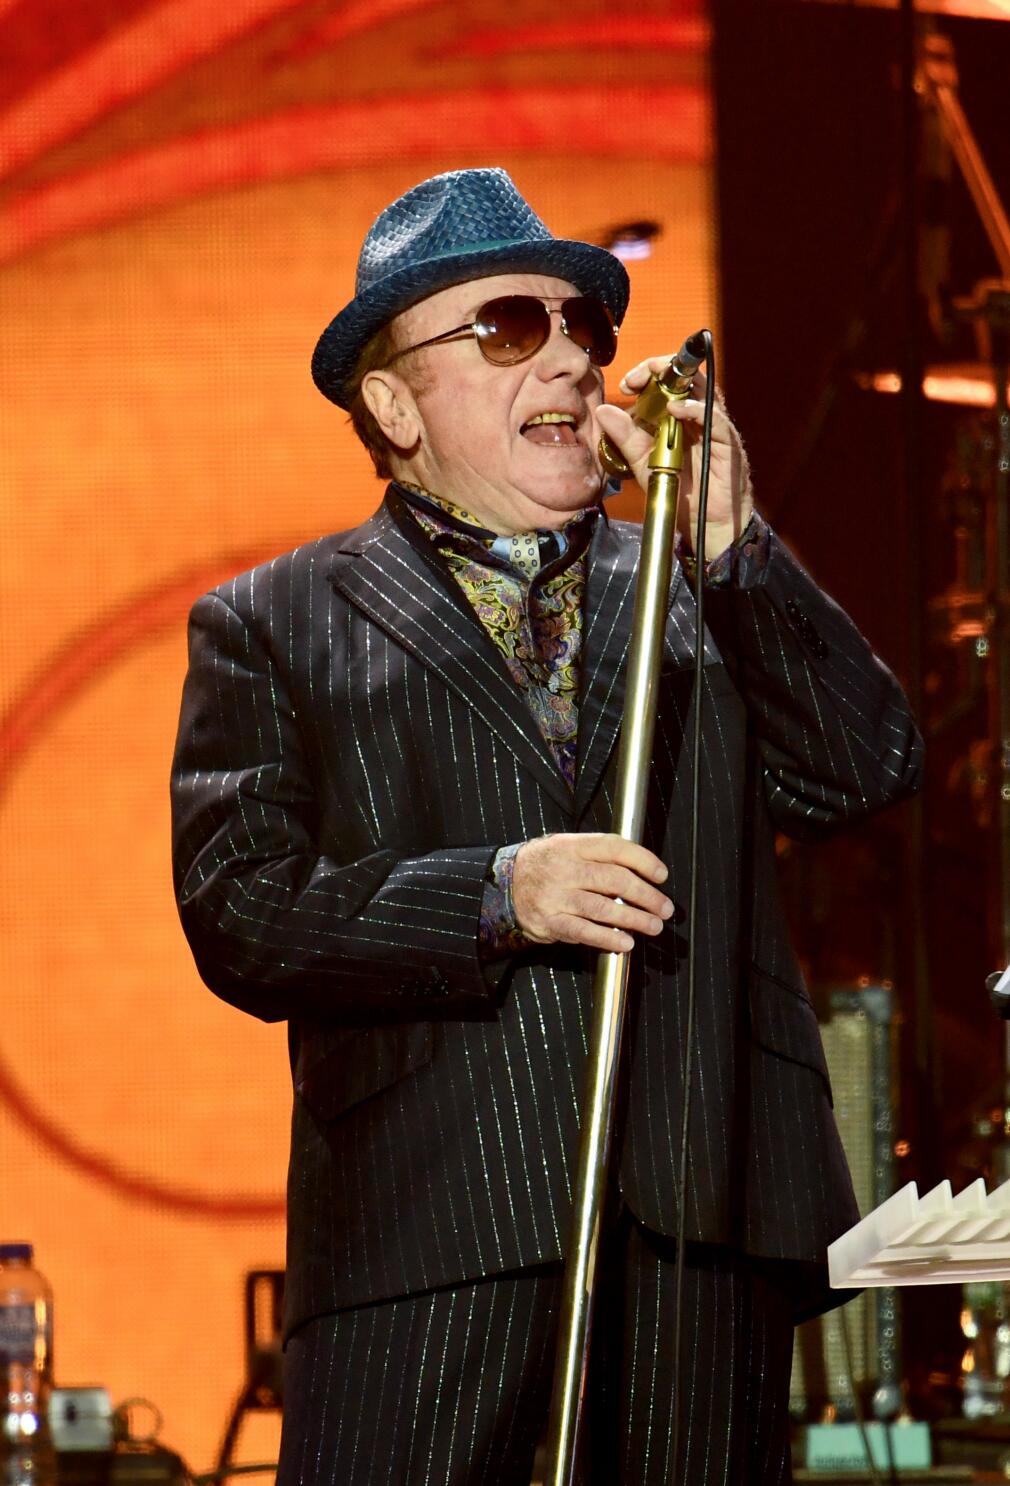 Singer Van Morrison has son at the age of 64